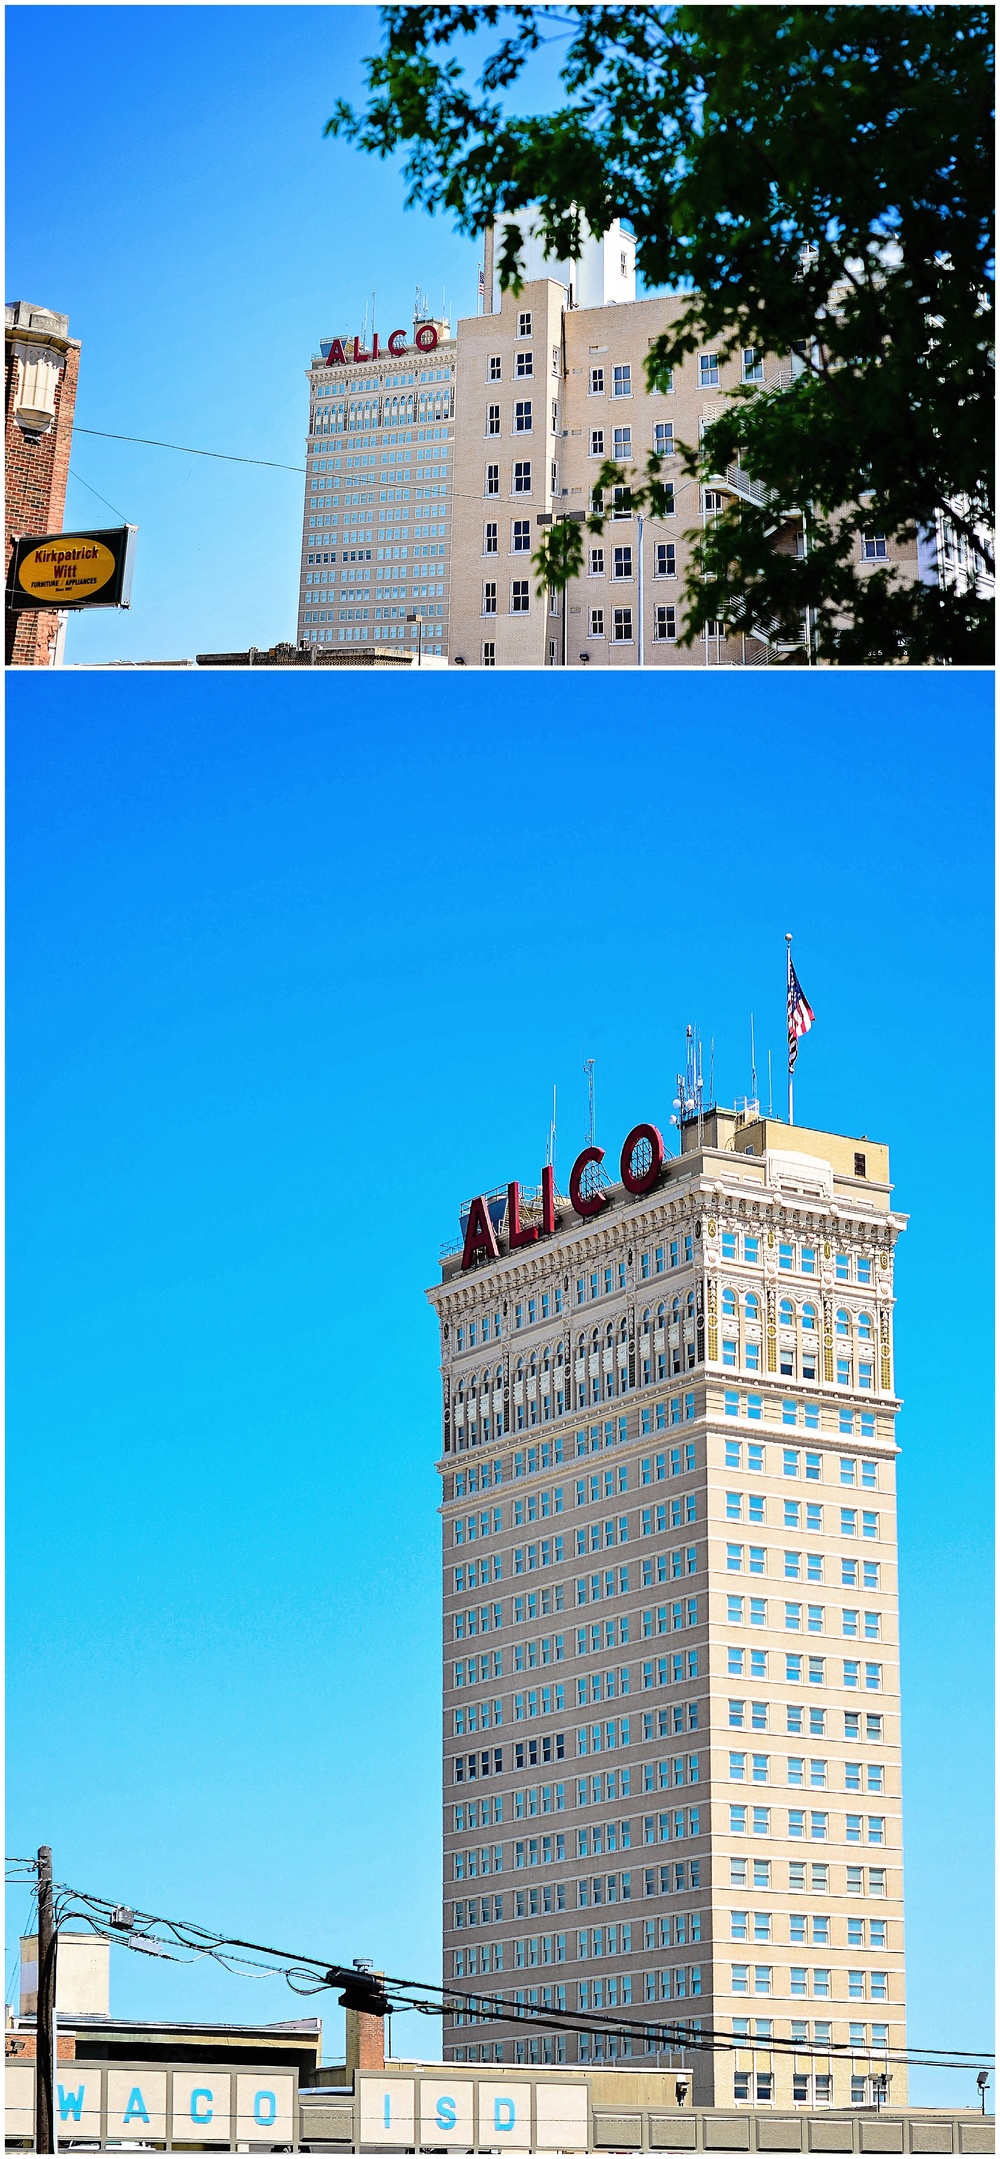  Downtown Waco, The Alico building is one of the telltale signs you are in Waco 